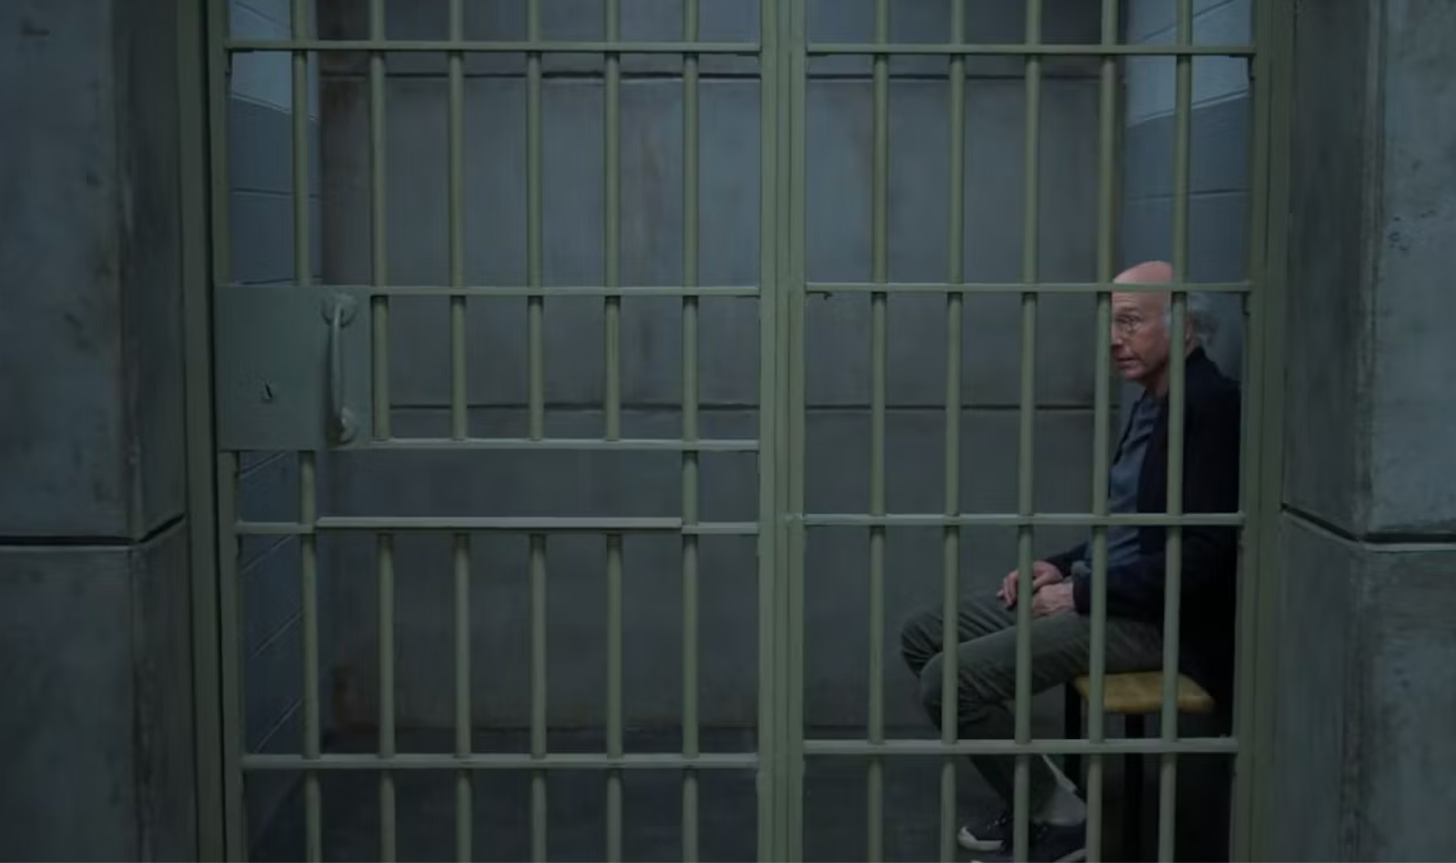 A screenshot from the Curb Your Enthusiasm finale of Larry David sitting in a jail cell